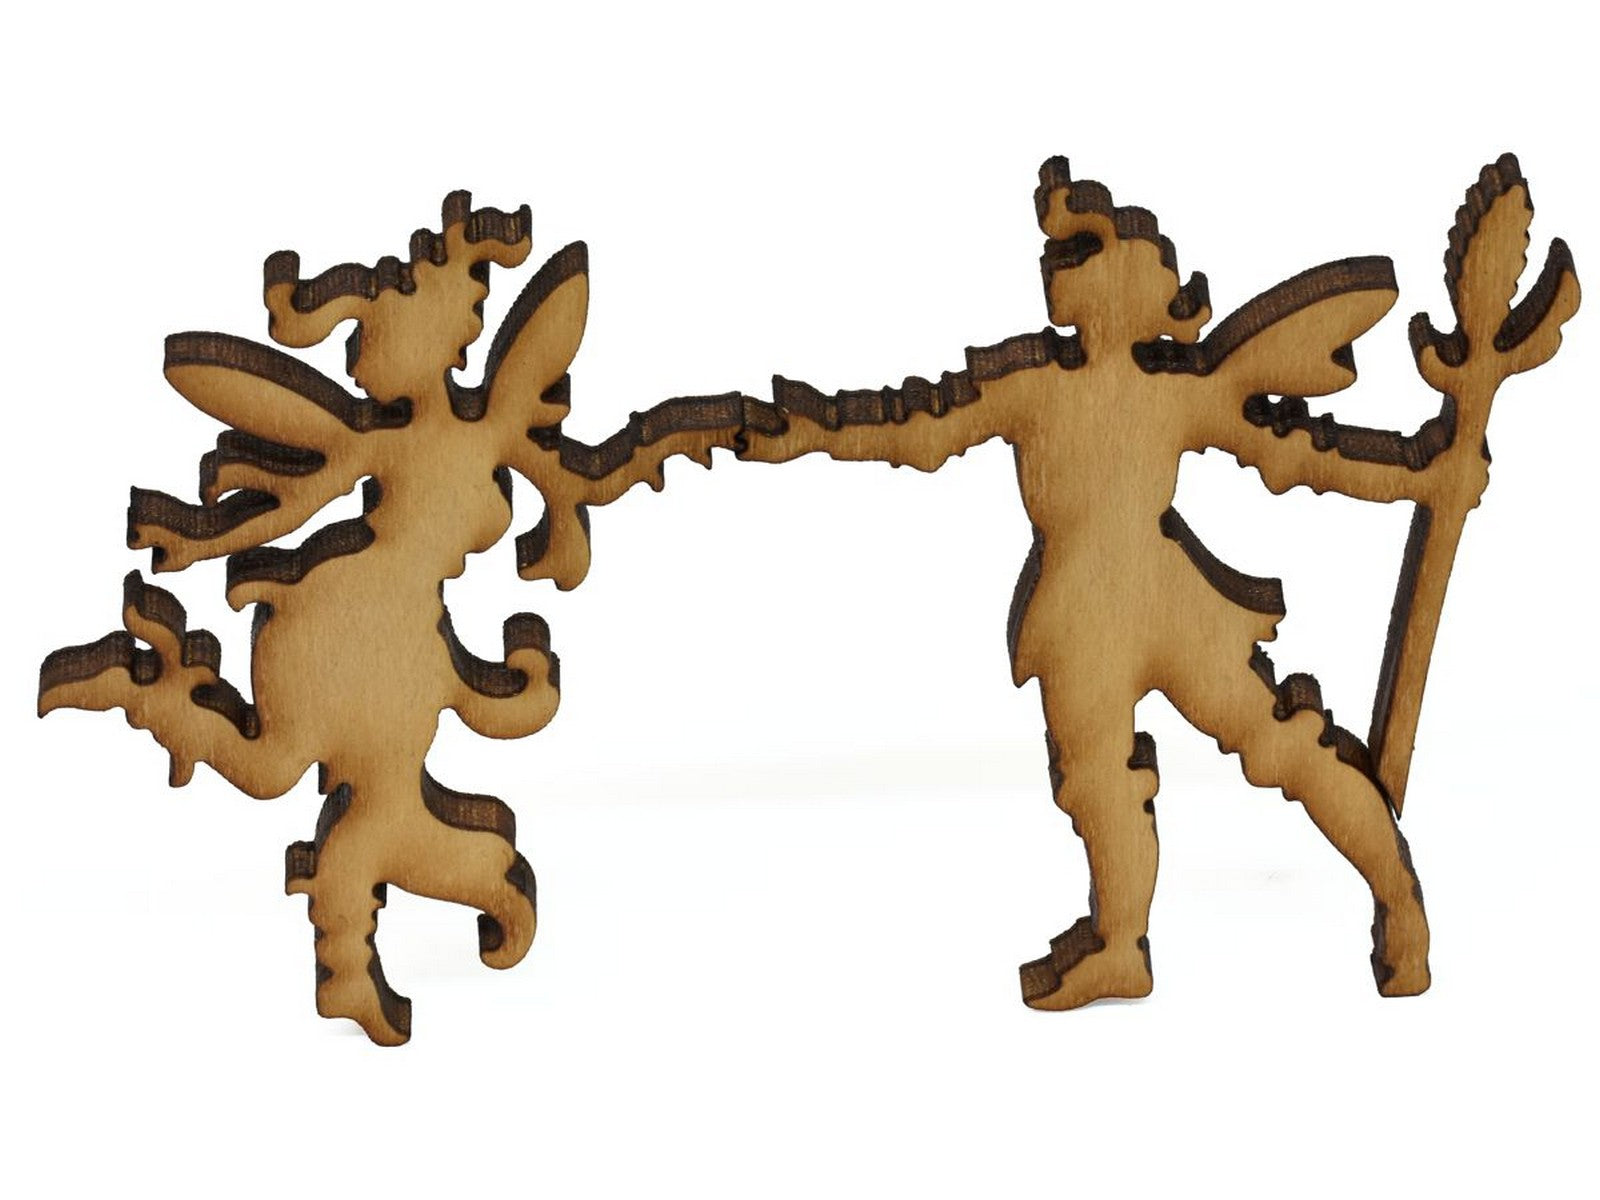 A closeup of pieces showing a pair of fairies holding hands.